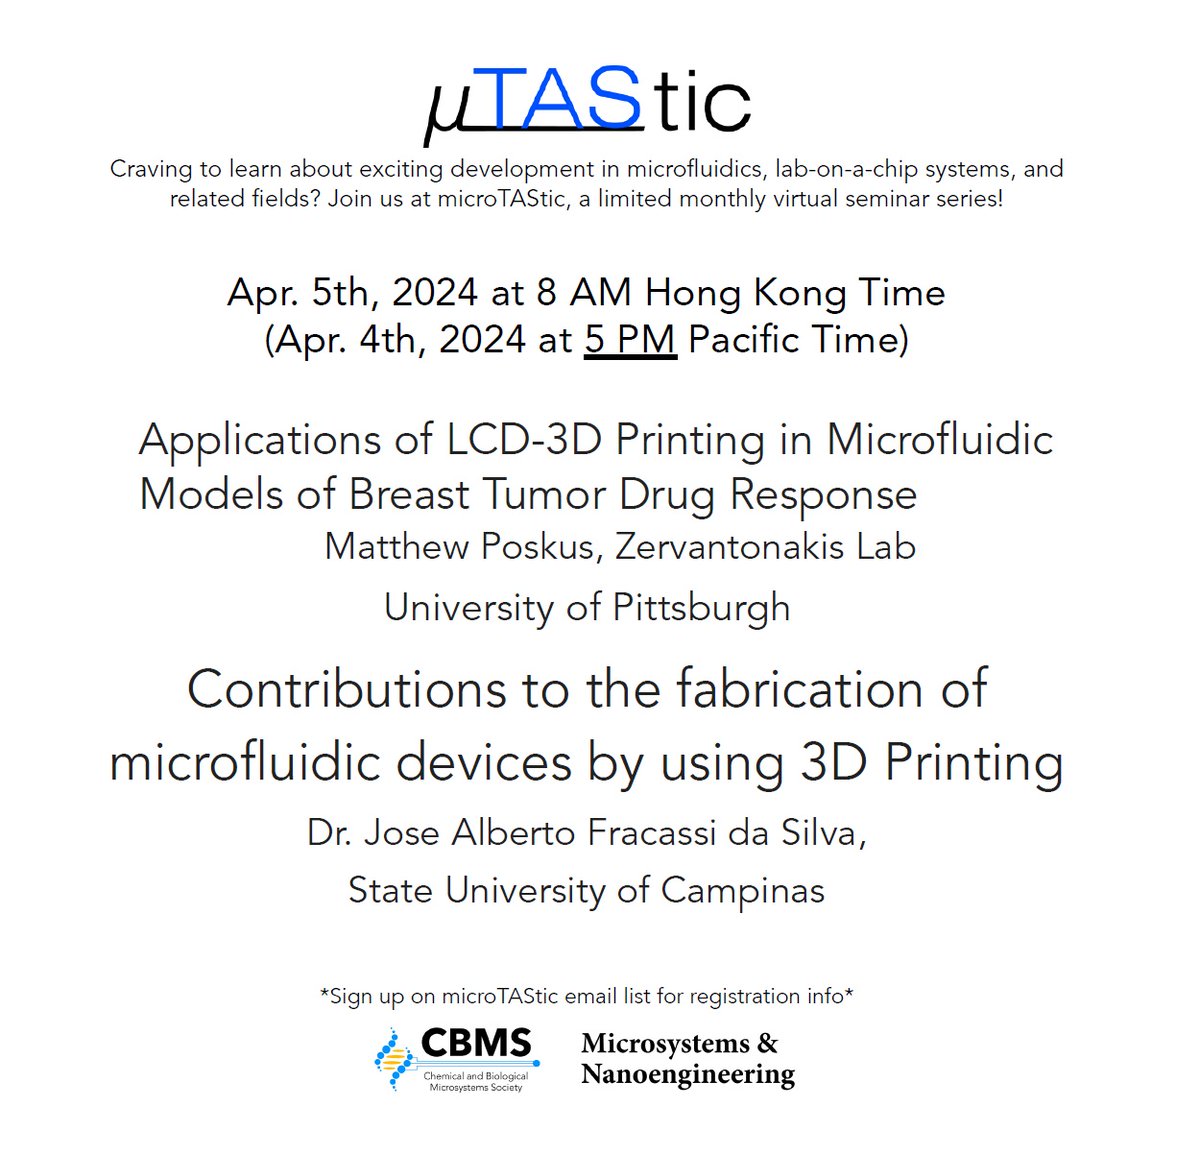 Reminder! Please note, starting this month the microTAStic seminar will start at 5 pm pacific time to keep the start time at 8 am for our colleagues joining us from countries in Asia that do not have daylight savings time changes.